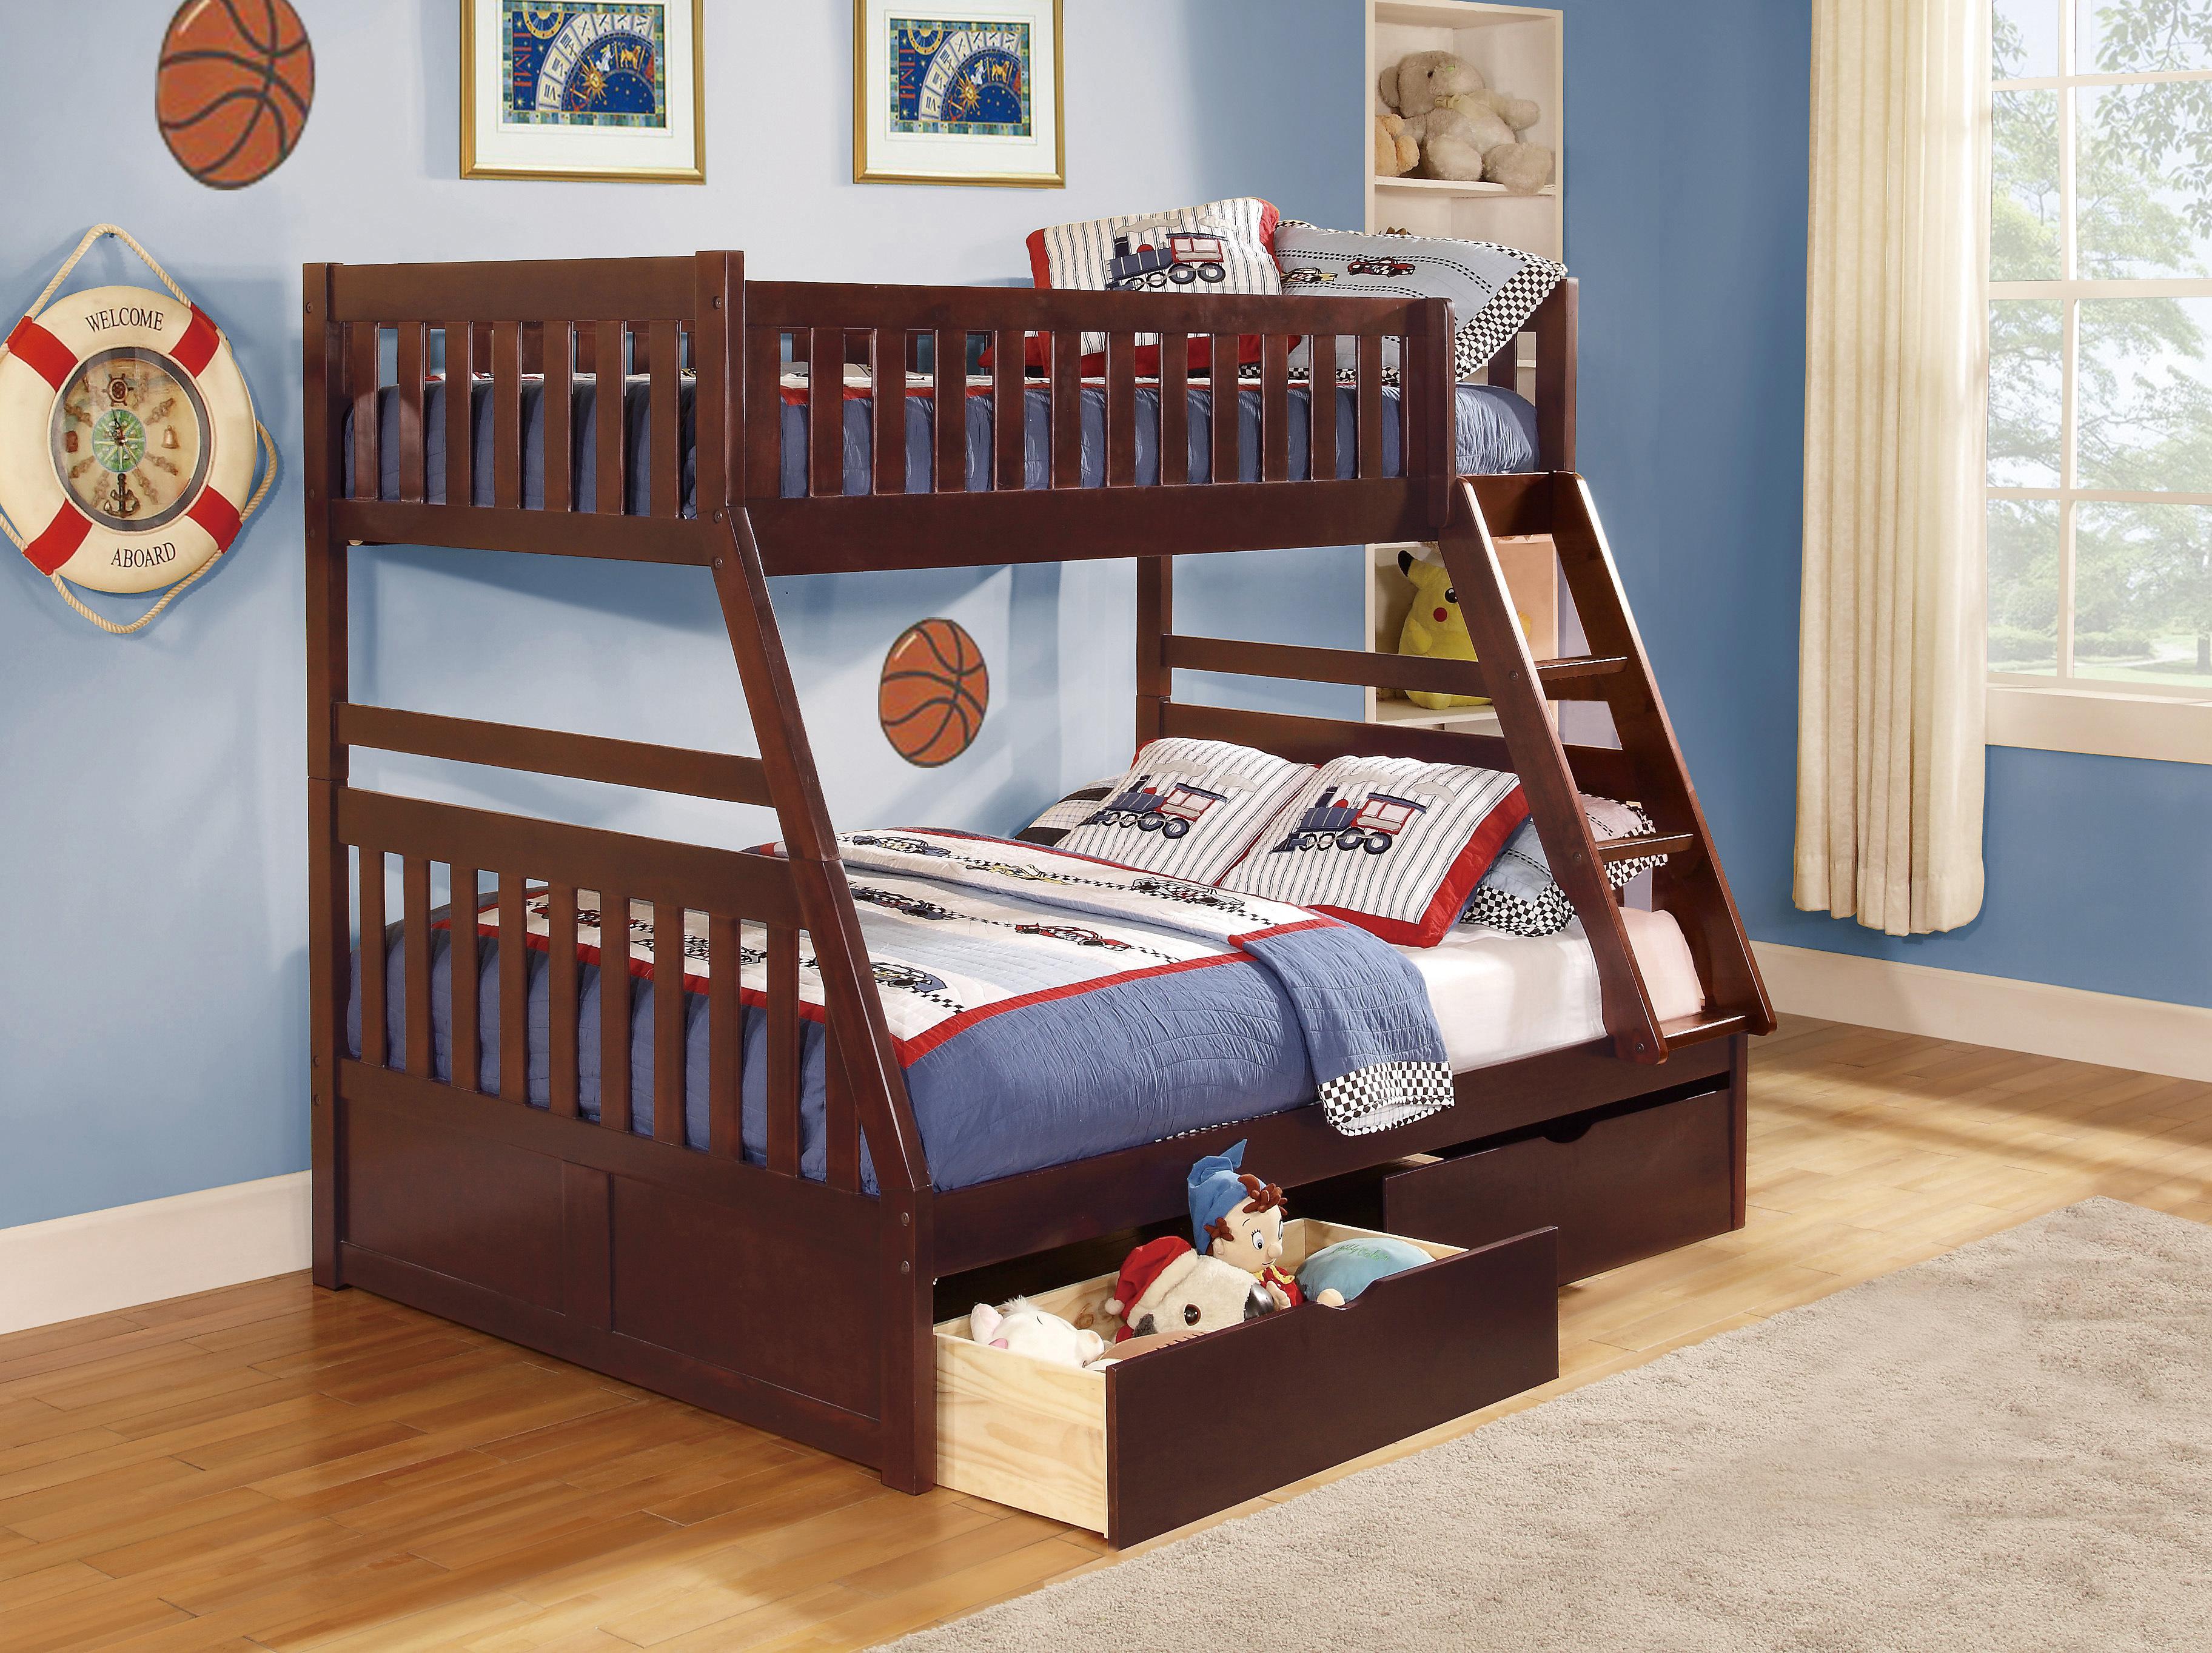 

    
Transitional Dark Cherry Wood Twin/Full Bunk Bed w/Storage Boxes Homelegance B2013TFDC-1*T Rowe
